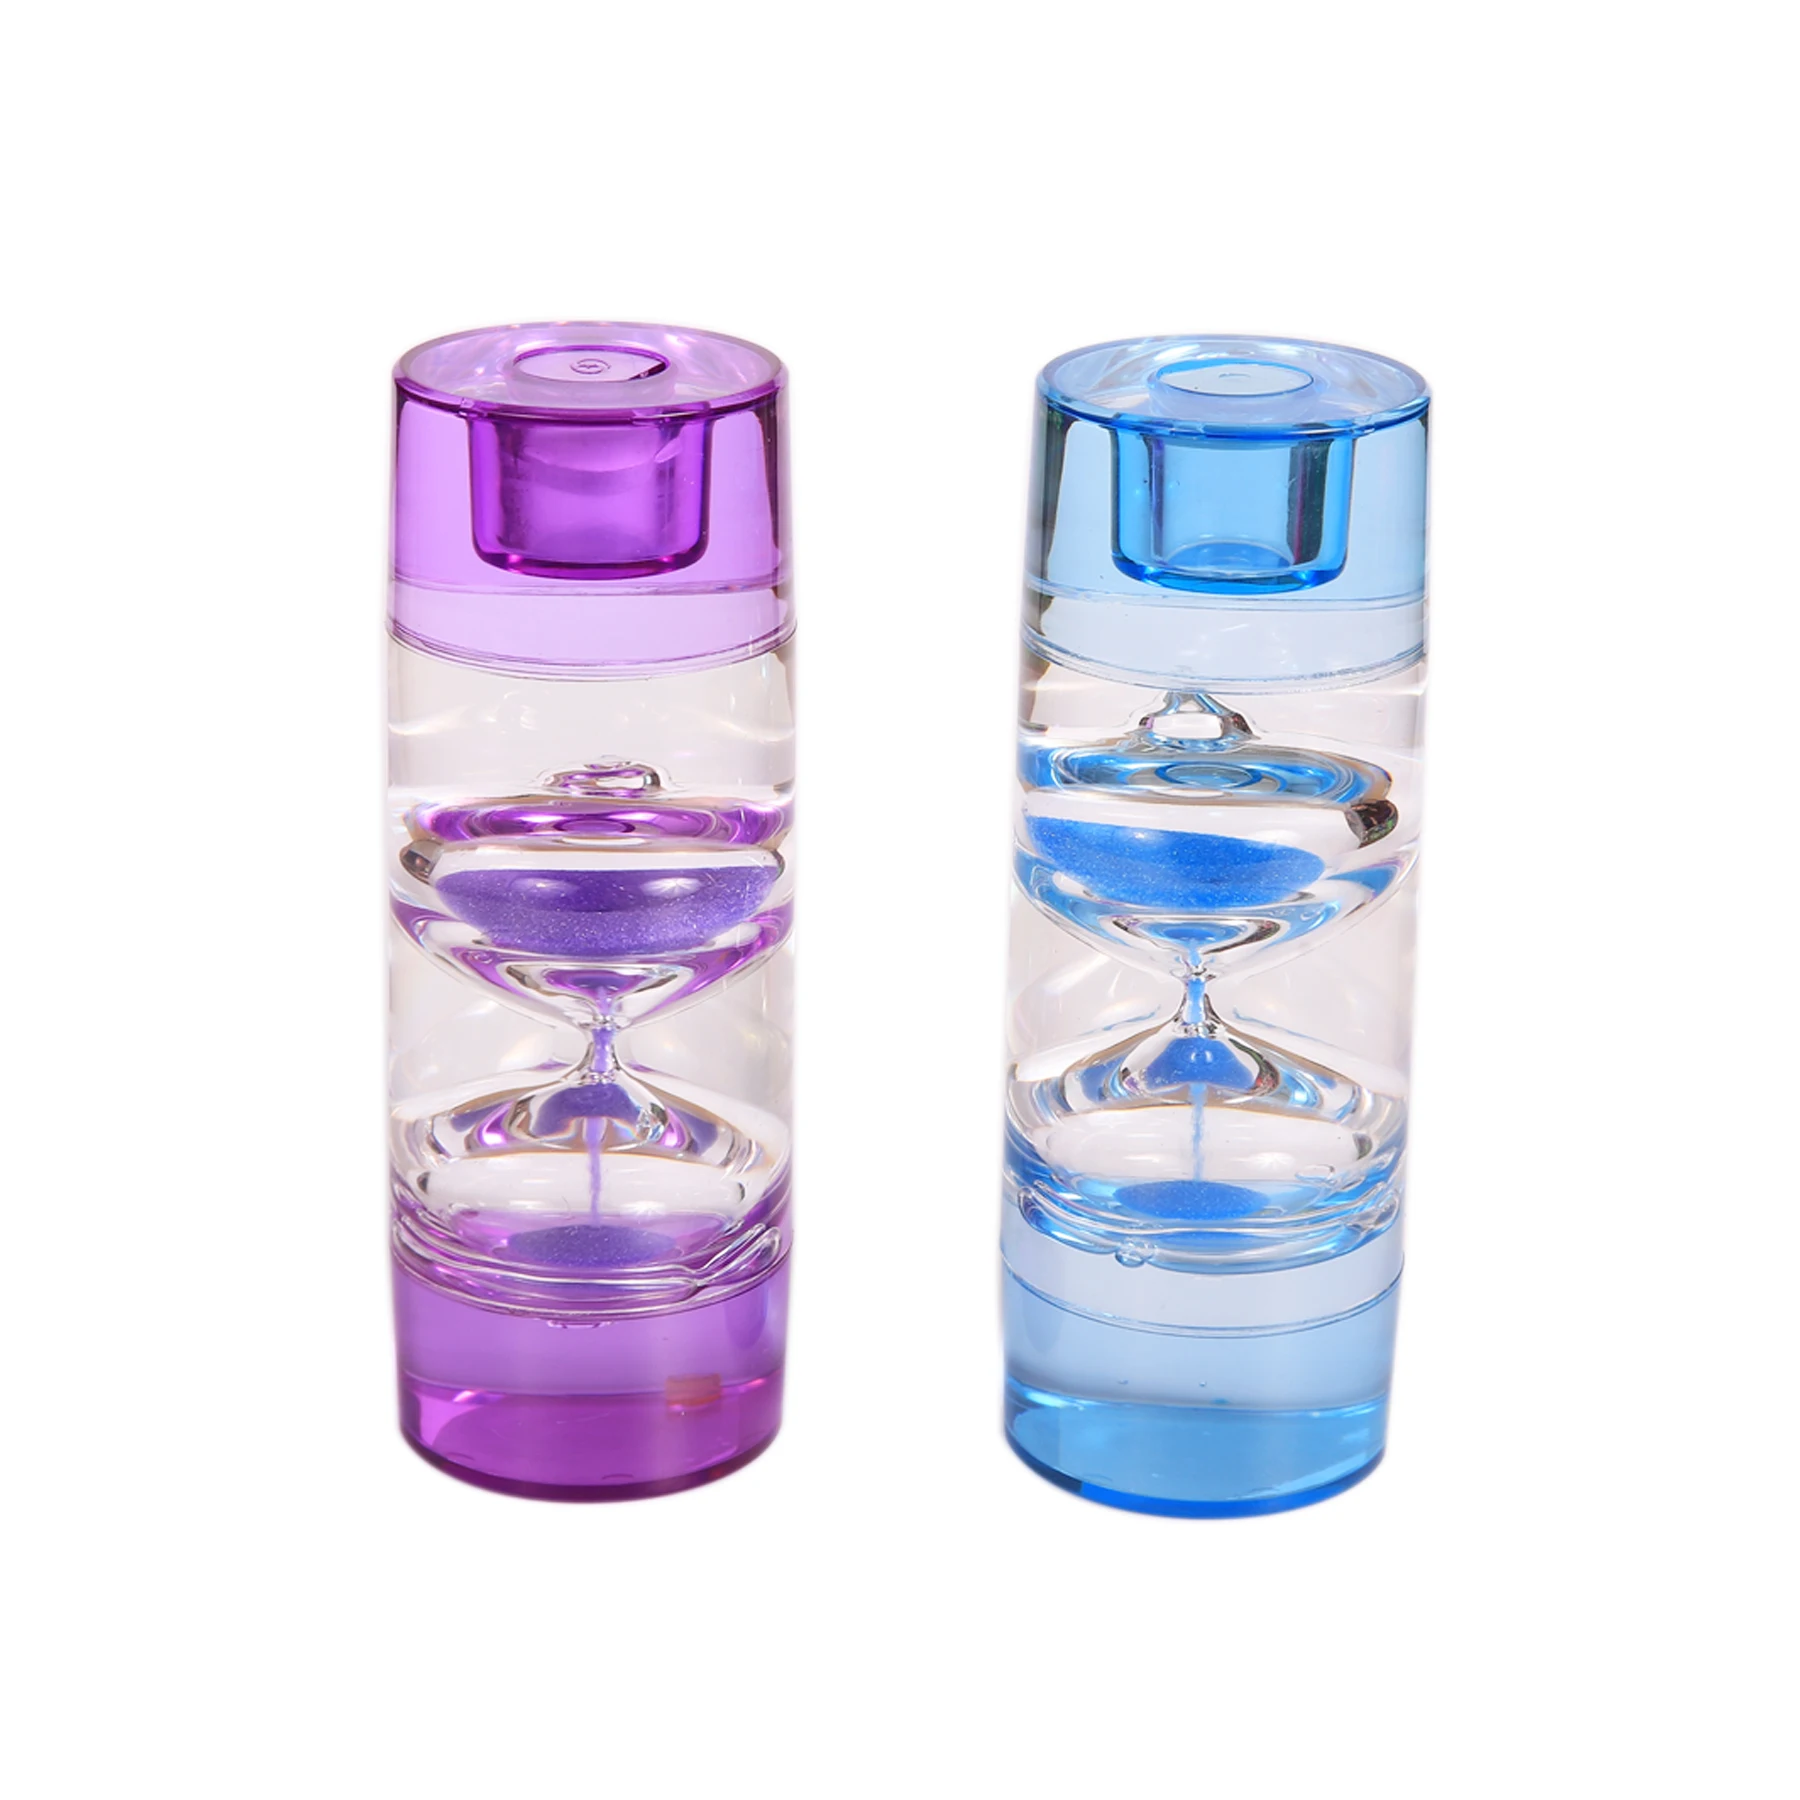 Sensory Play Fidget Toy And Stress Management Kids And Adults Hourglass Or Sand Timer Liquid Motion Hourglass